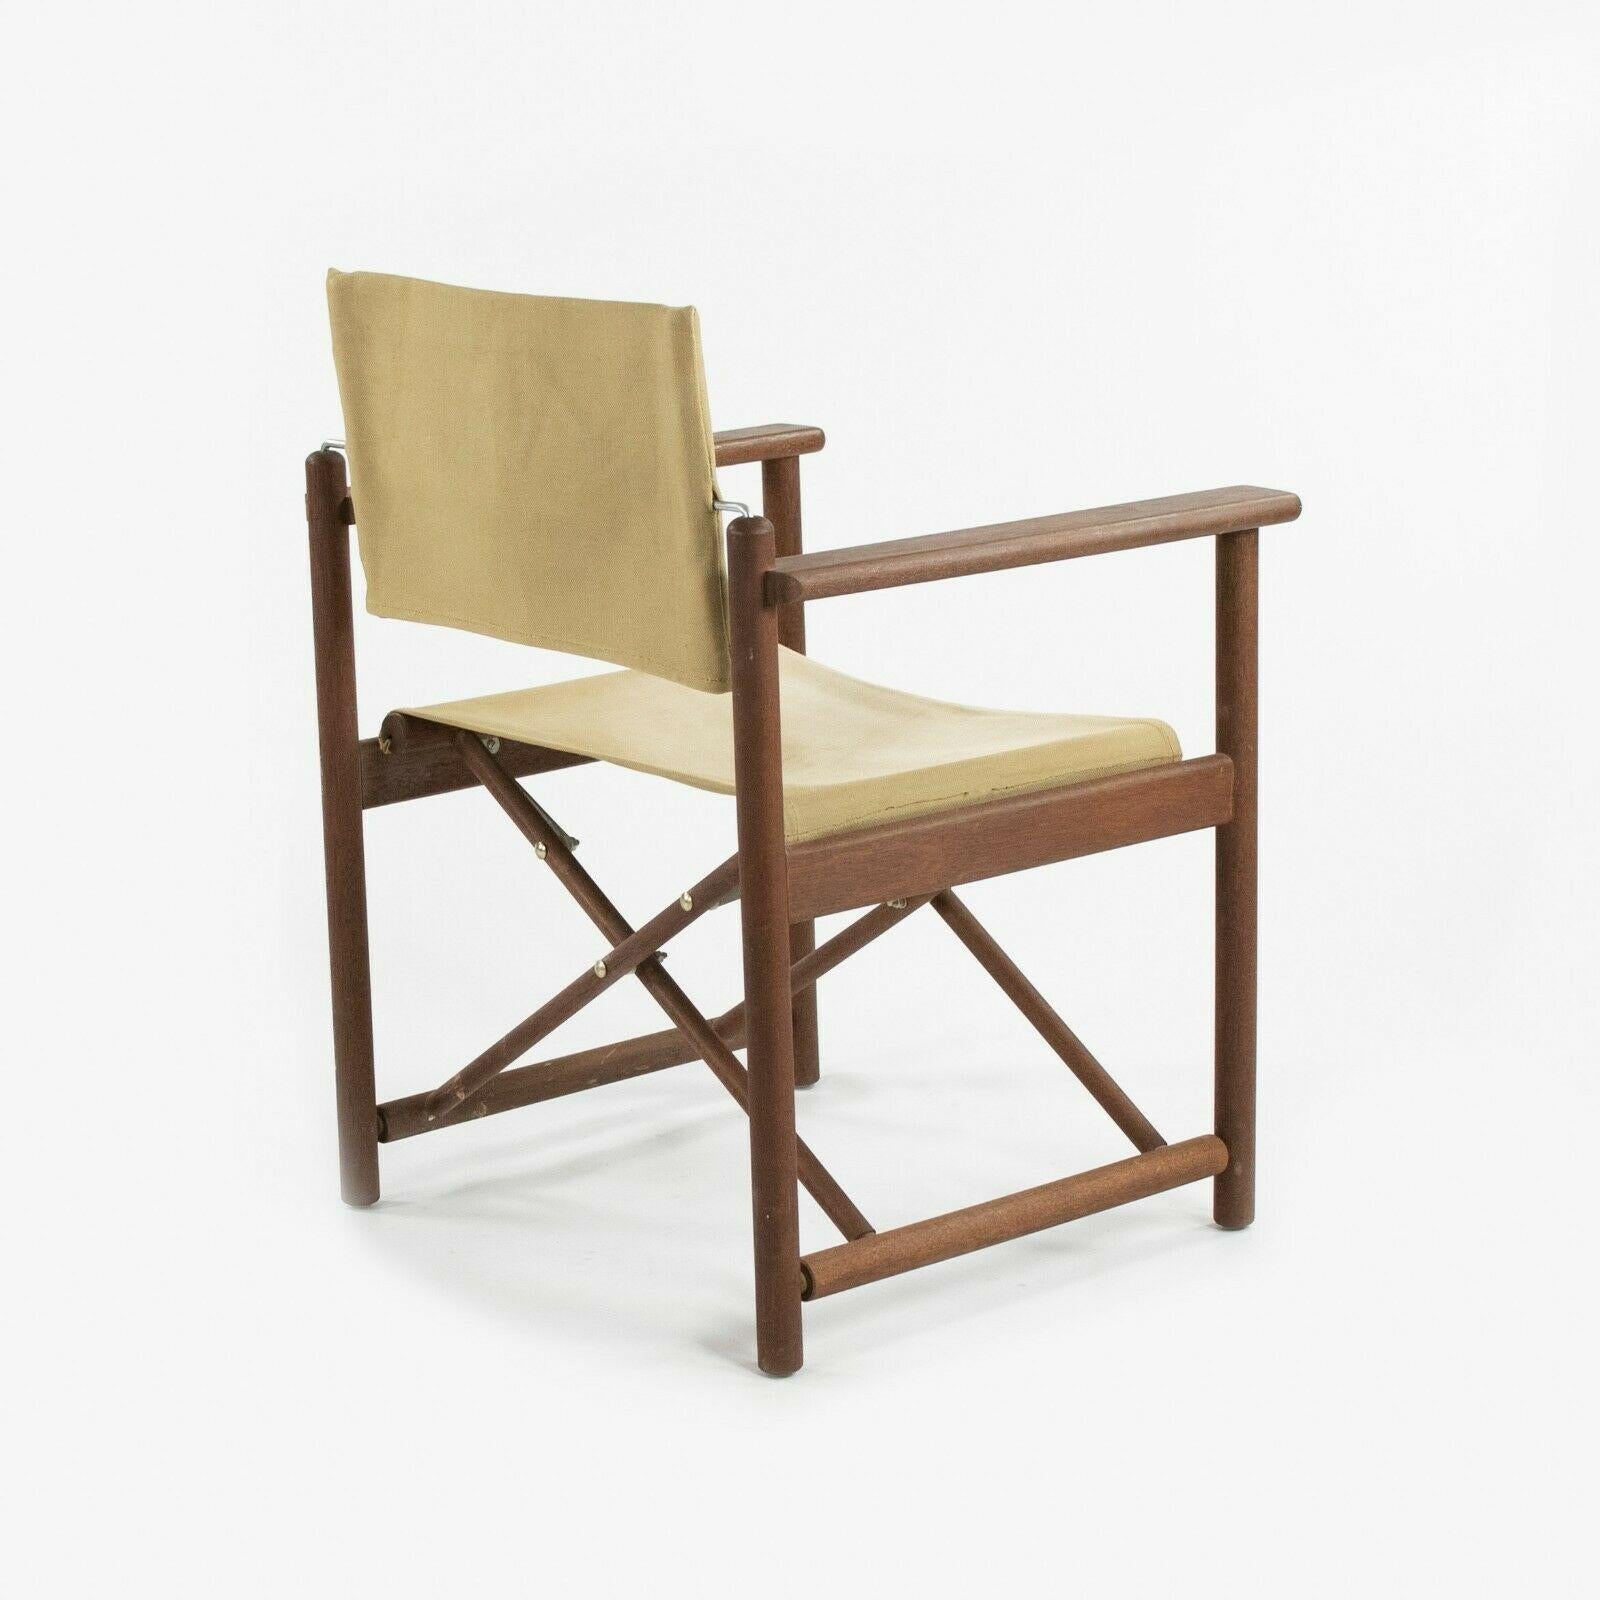 1960s Danish Modern Walnut and Canvas Folding Campaign Chair For Sale 5